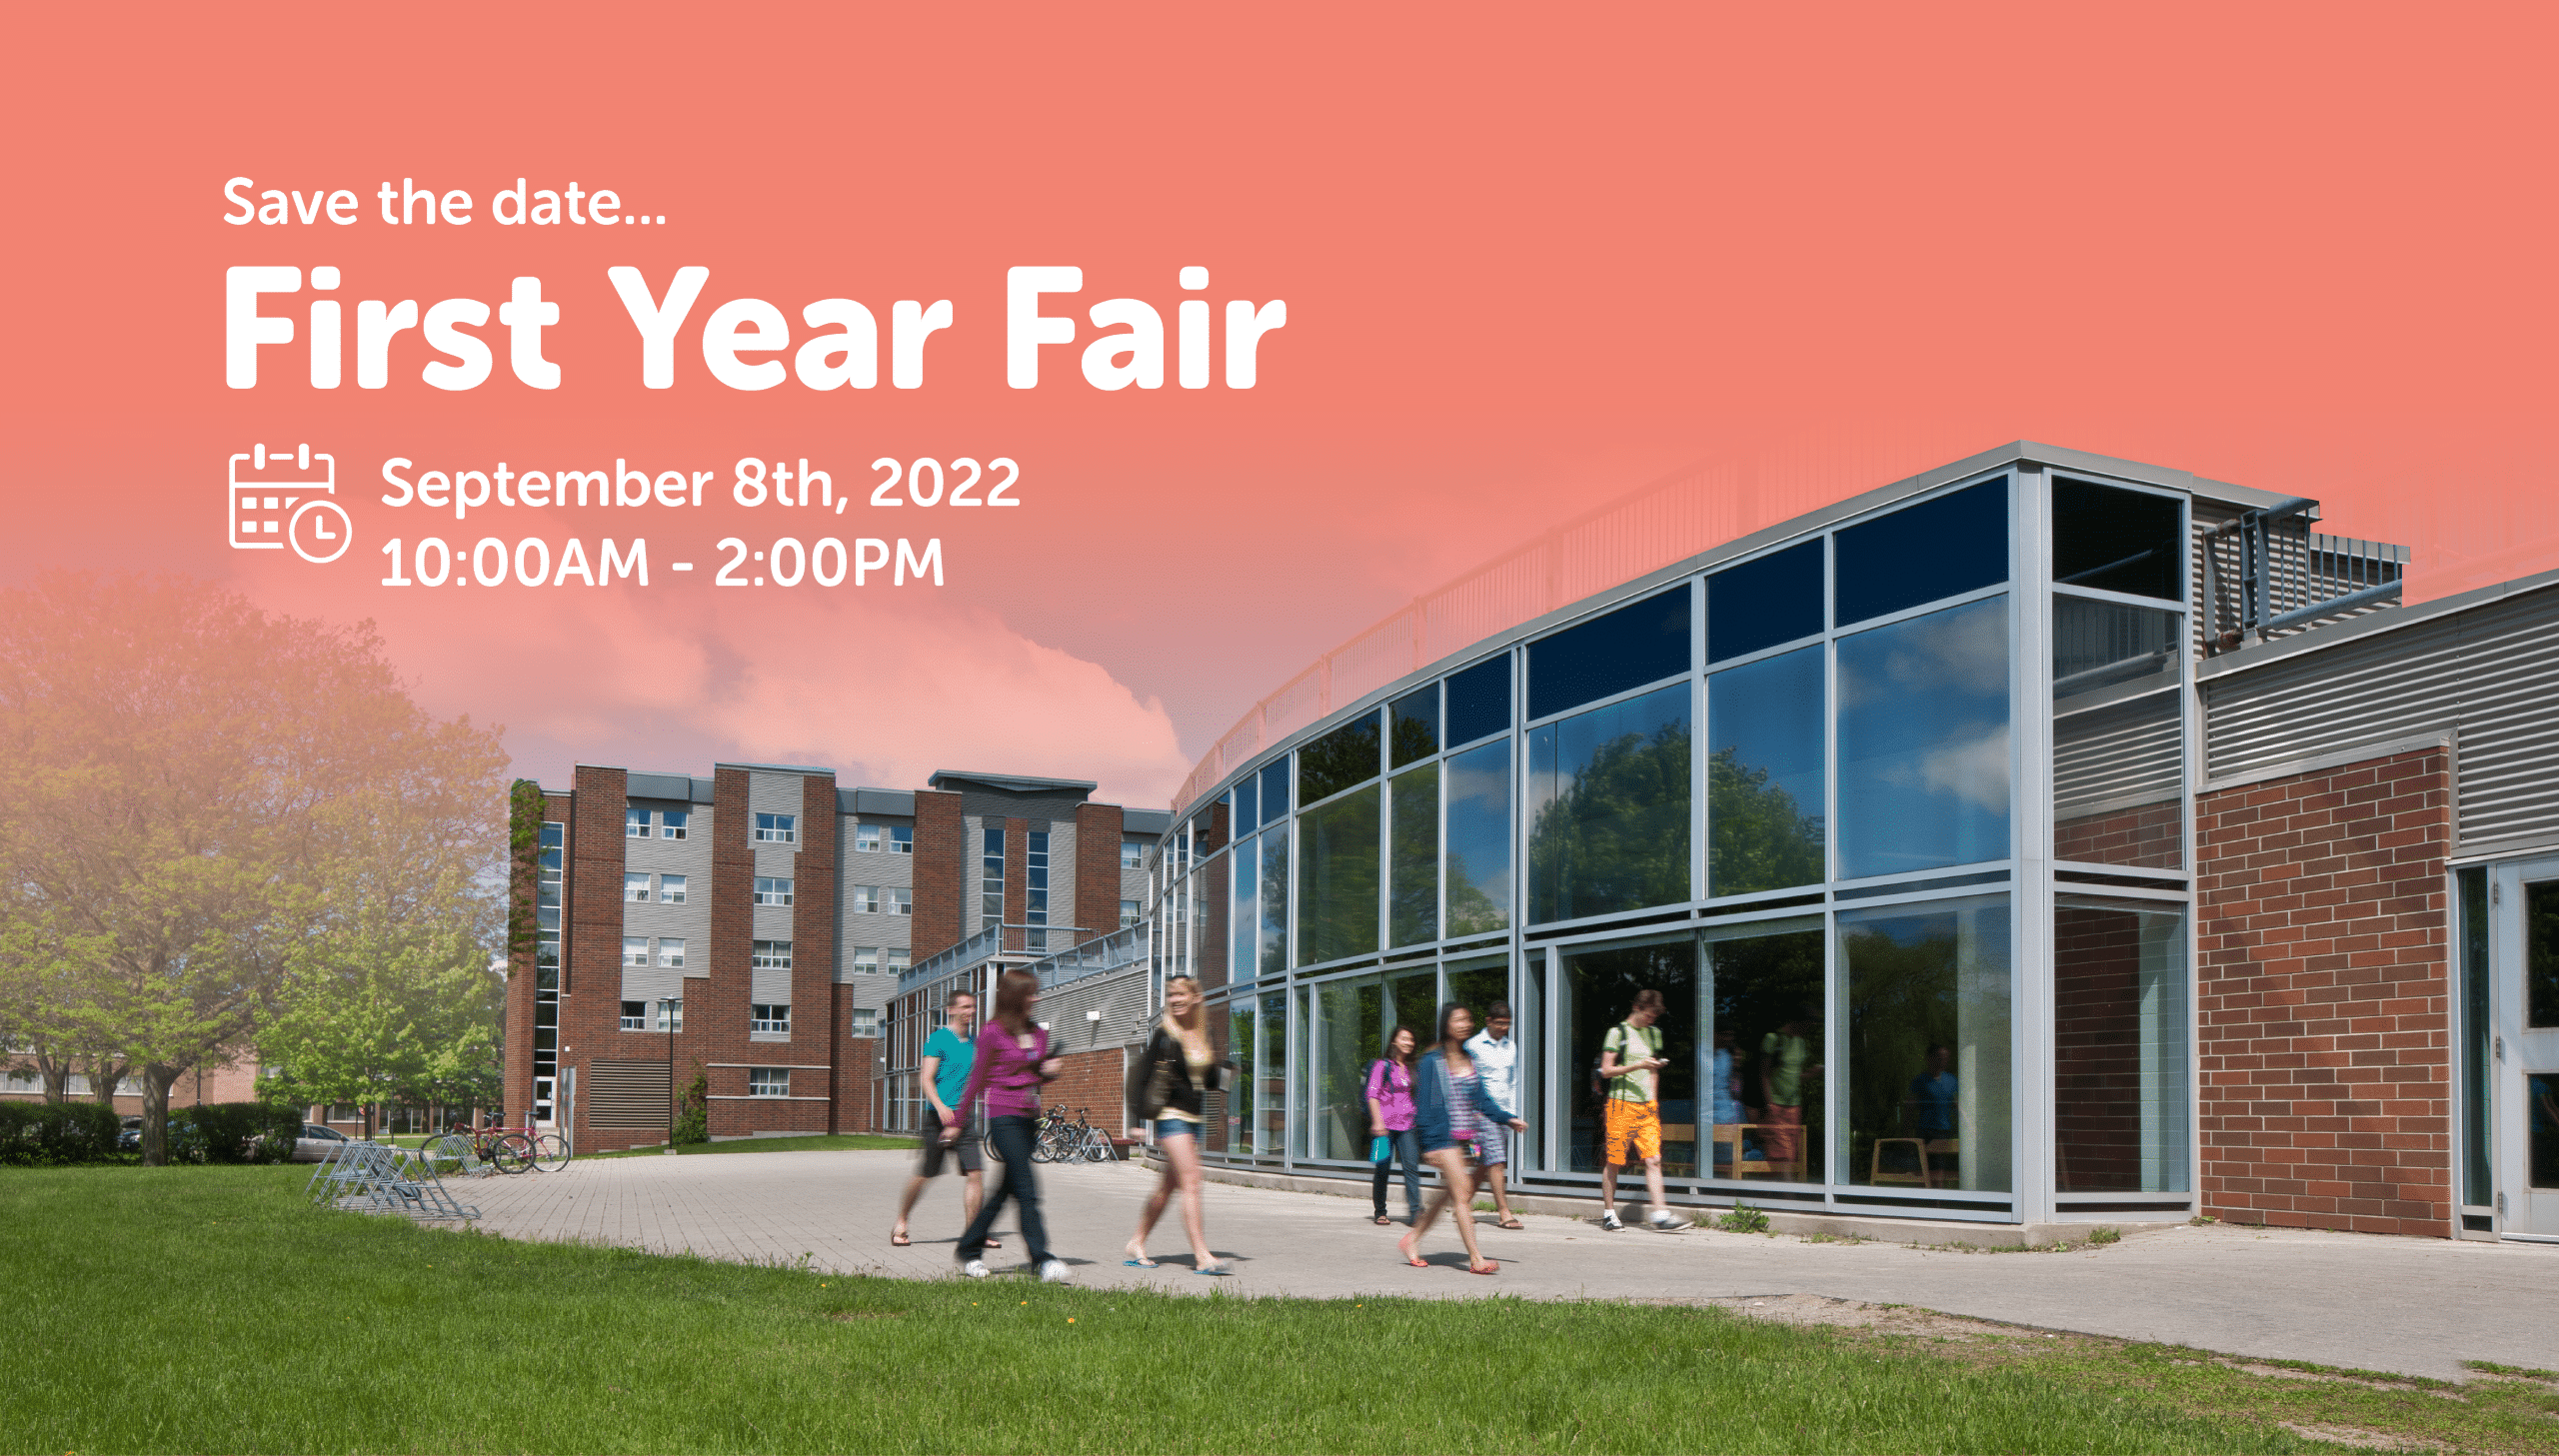 Save the date...First year Fair. September 8th 2022, 10:00am - 2:00pm